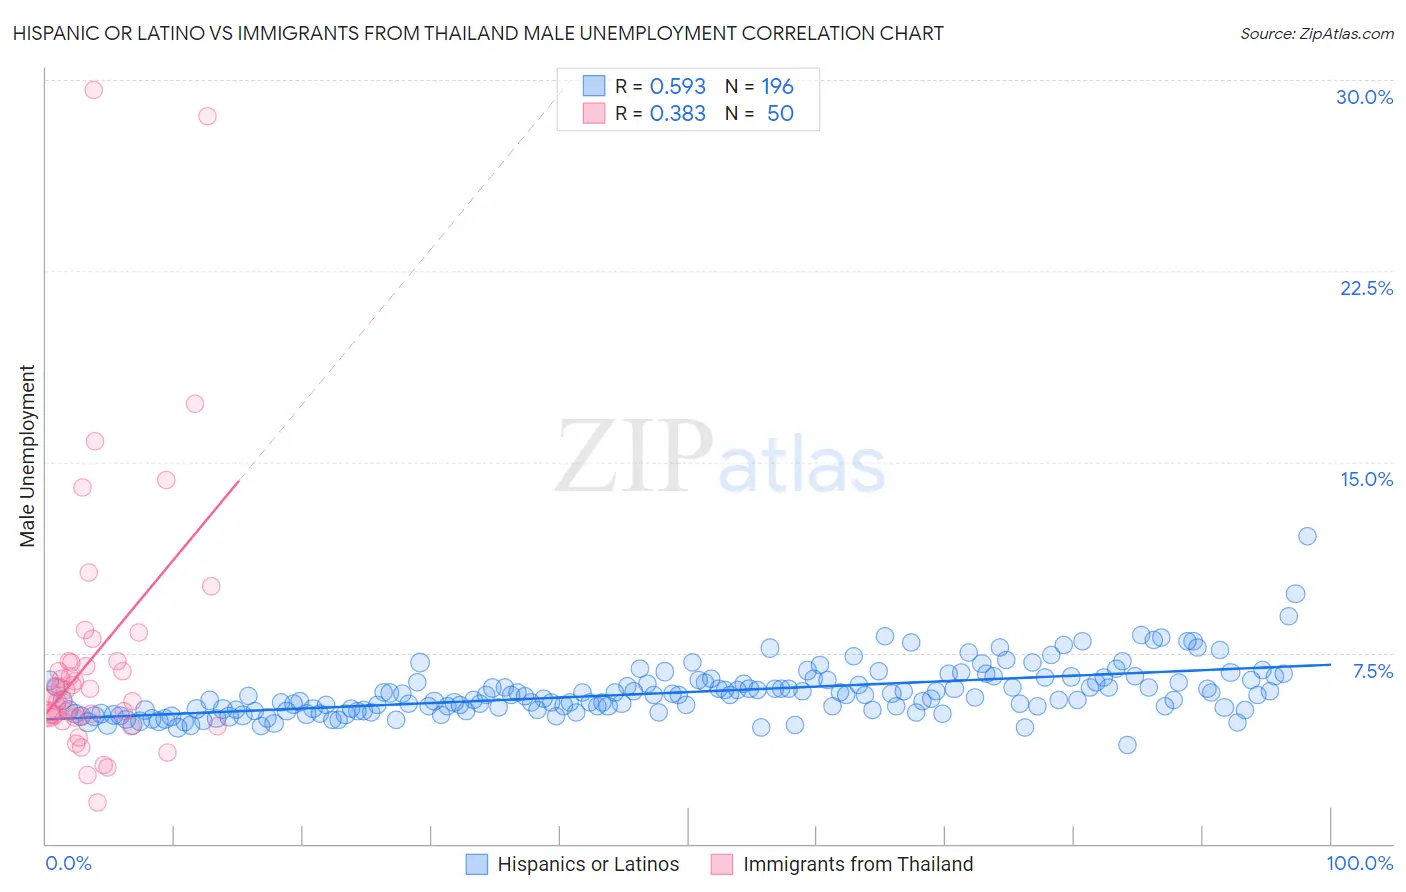 Hispanic or Latino vs Immigrants from Thailand Male Unemployment